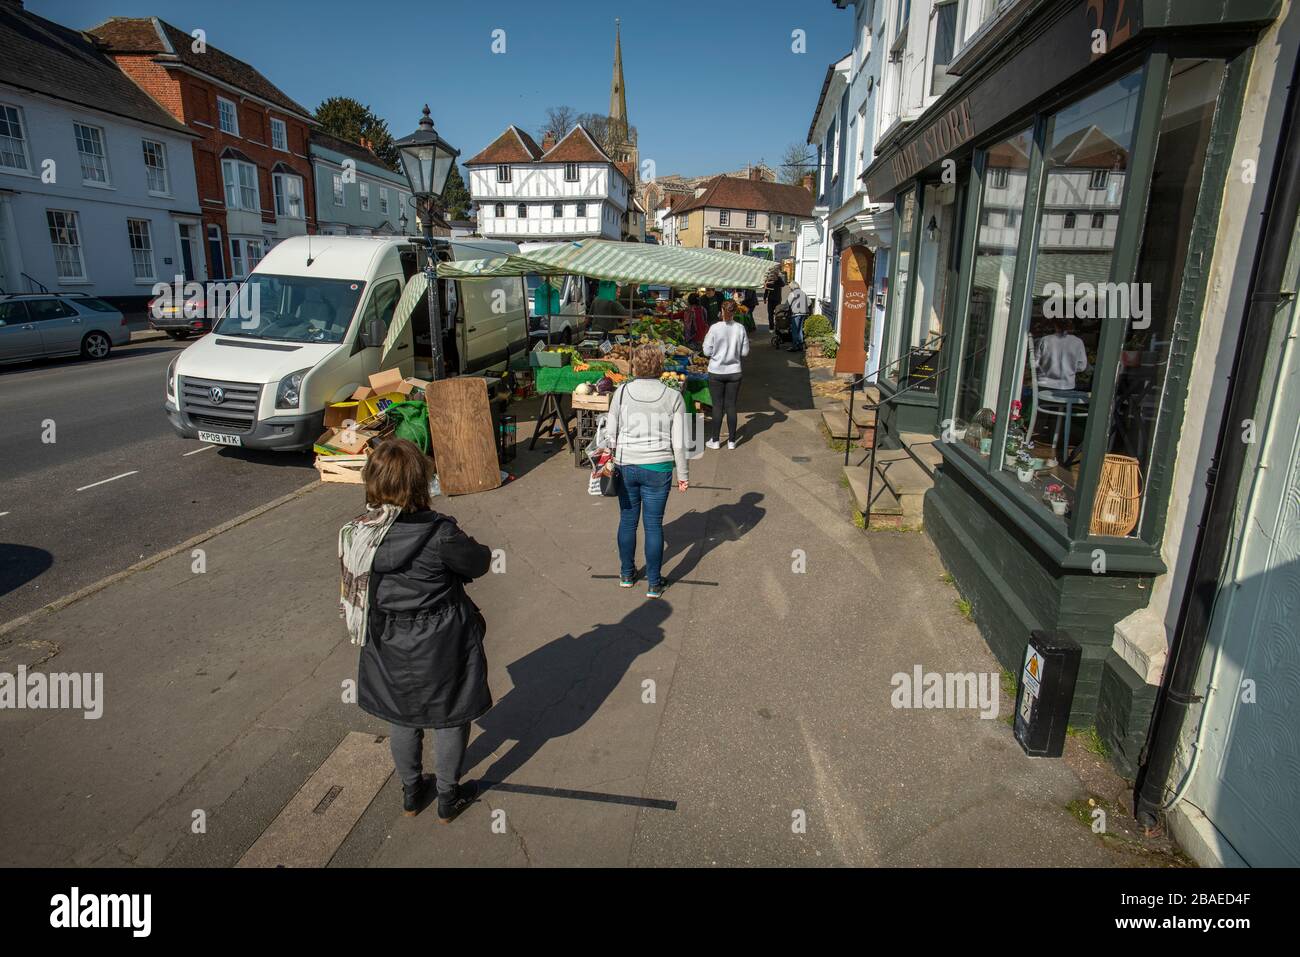 Thaxted, UK. 27th Mar, 2020. Thaxted Essex UK. Market day during Coronavirus lock down. 27 March 2020 Showing customers keeping the regulation two metres apart marked with black tape on the pavement waiting to be served queueing at the fruit and veg stall. Thaxted Market has existed for hundreds of years in the shadow of the 14th century Guildhall and Thaxted Church. Photograph by Credit: BRIAN HARRIS/Alamy Live News Stock Photo